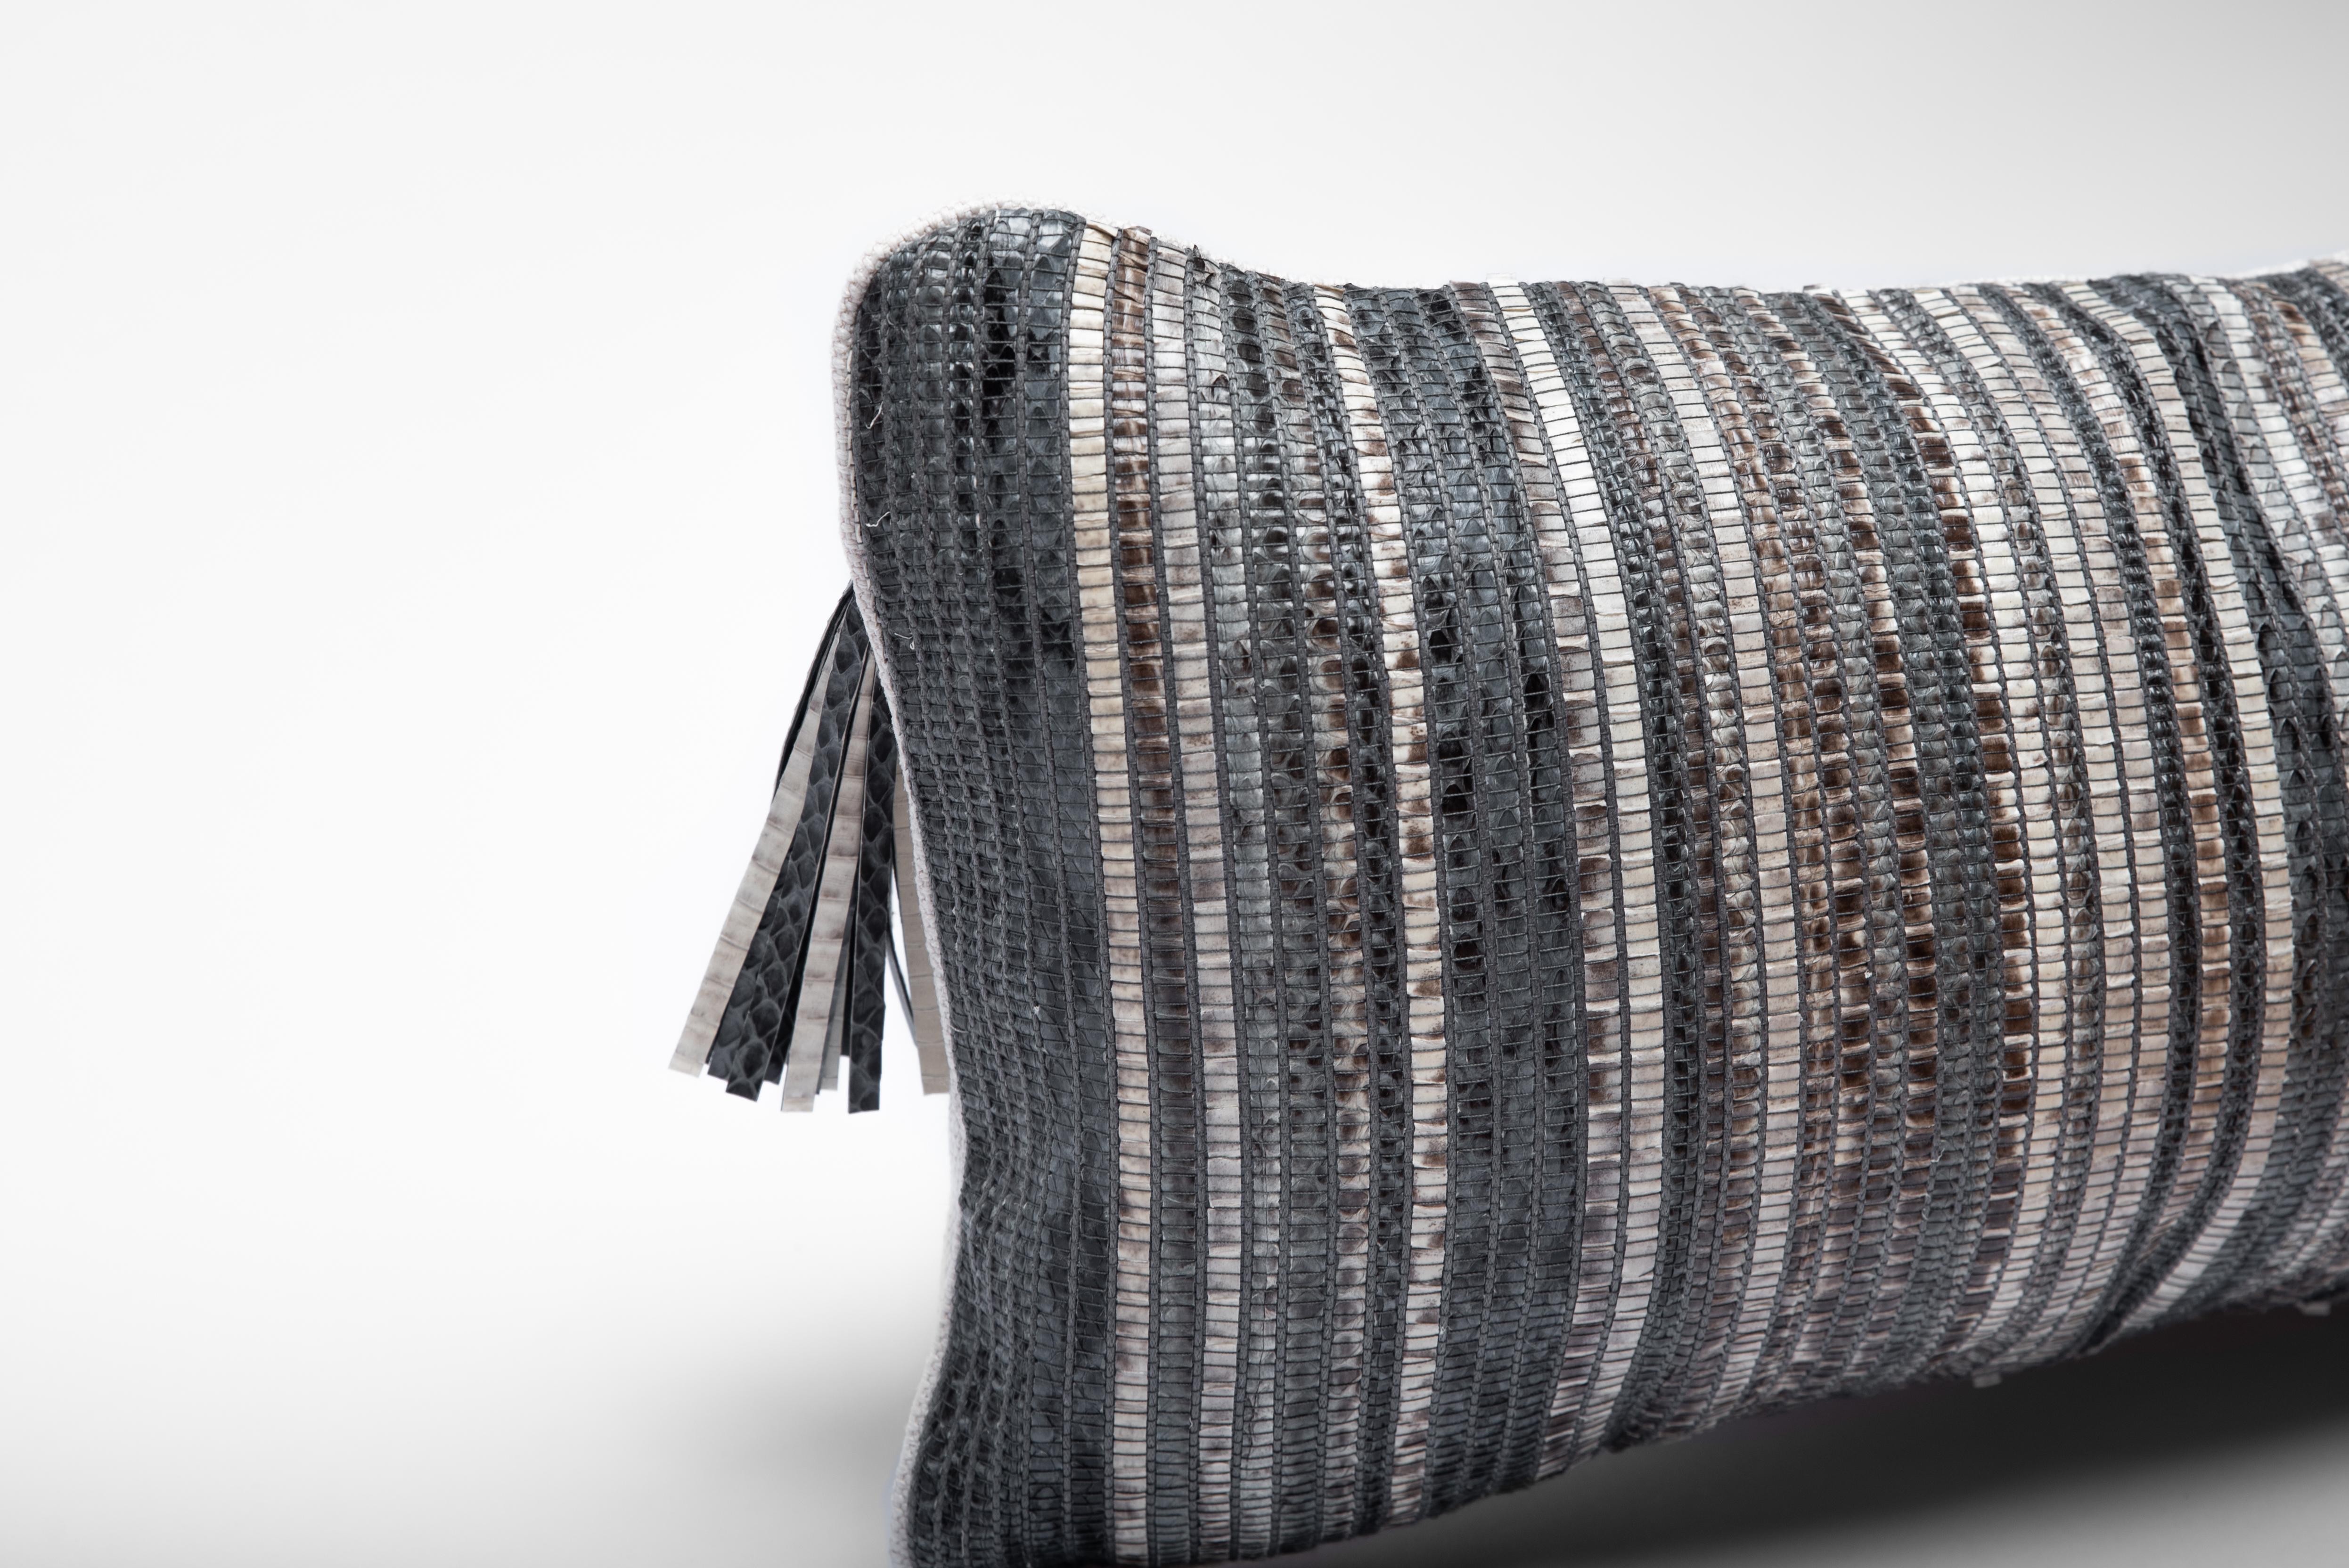 The woven snakeskin cushion by Kifu, Paris is the ultimate luxury home textile piece. This textile is unique and original to the brand, who uses traditional weaving techniques with wooden looms to develop this supple and exotic textile. The back is